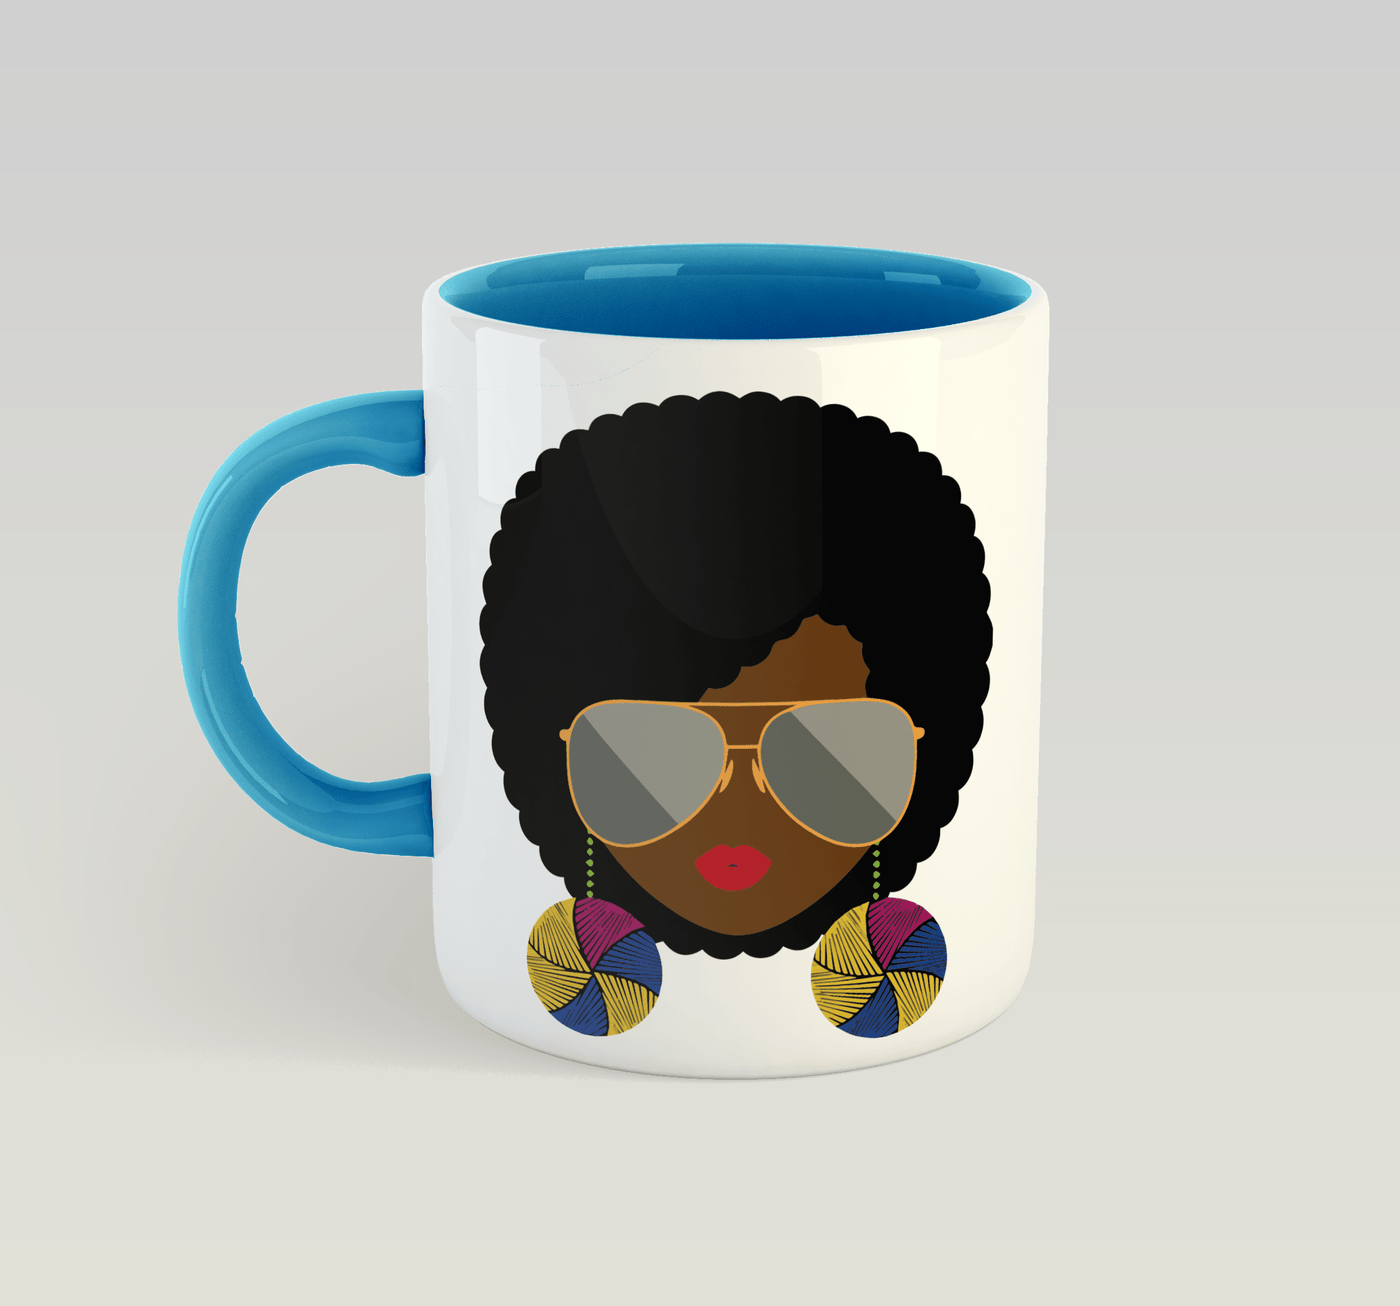 She Believed Mug by AfroTouch - Blue - Migration Museum Shop